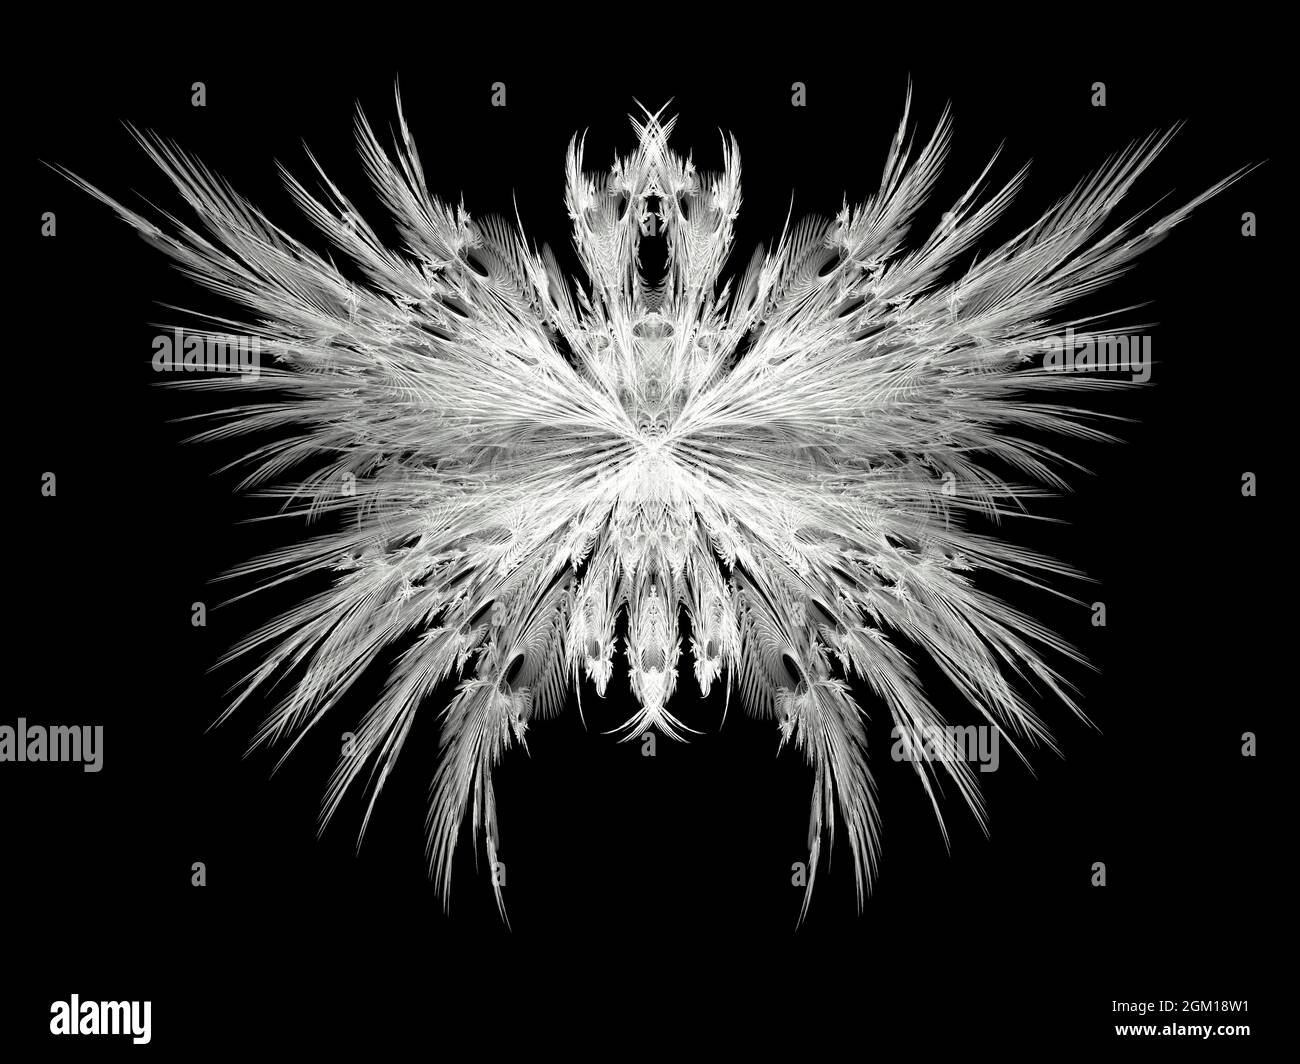 Abstract Angel Wings Fractal Design Stock Photo